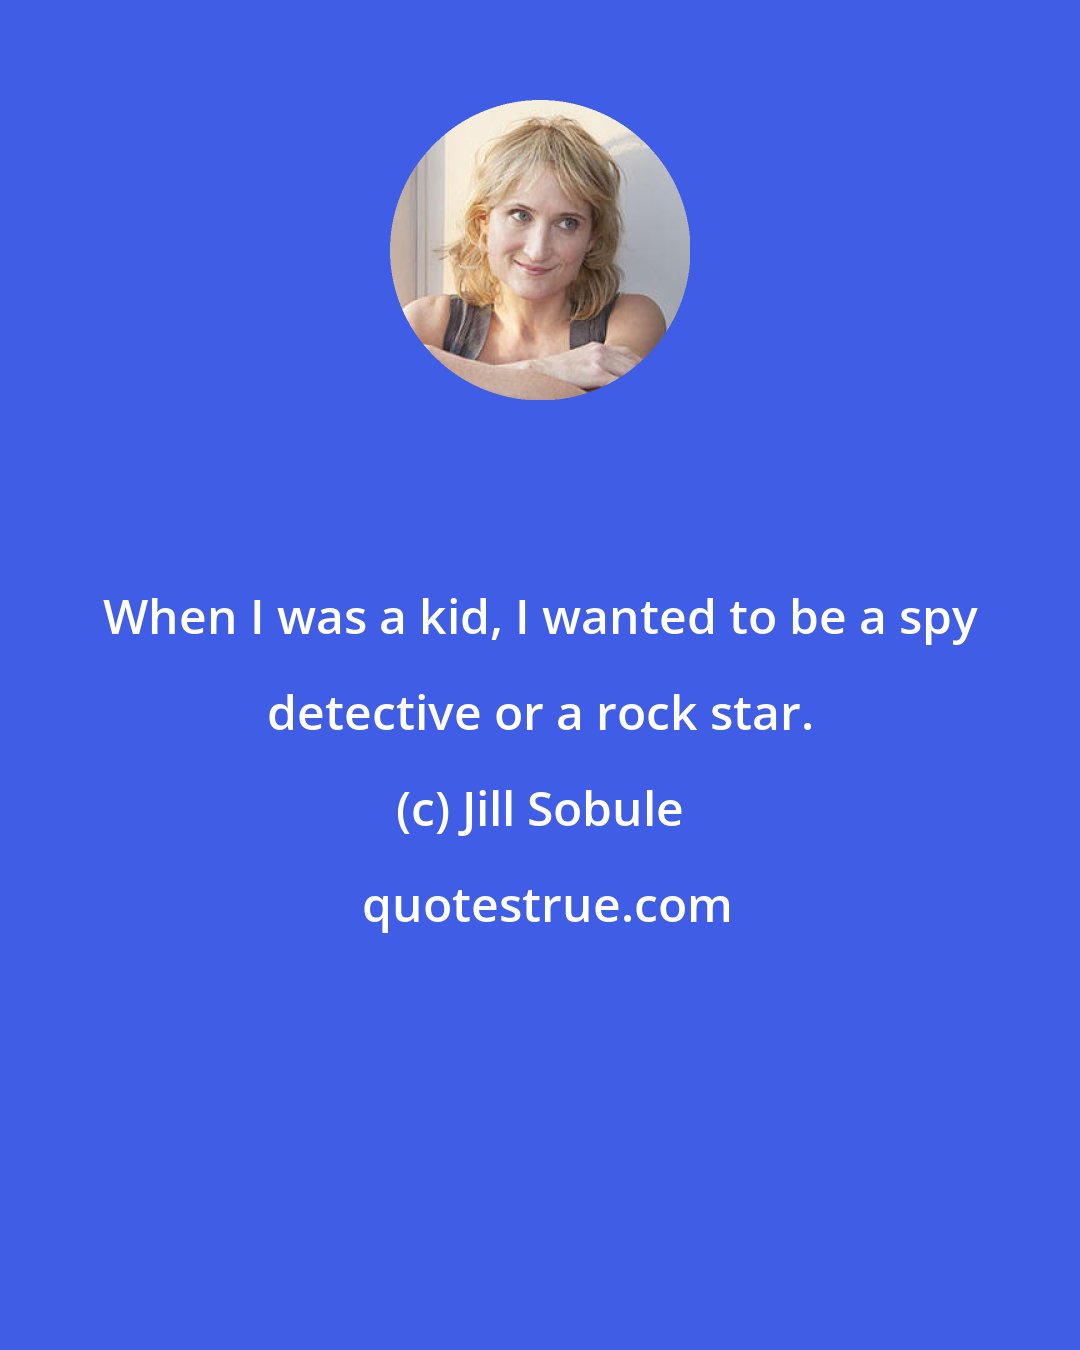 Jill Sobule: When I was a kid, I wanted to be a spy detective or a rock star.